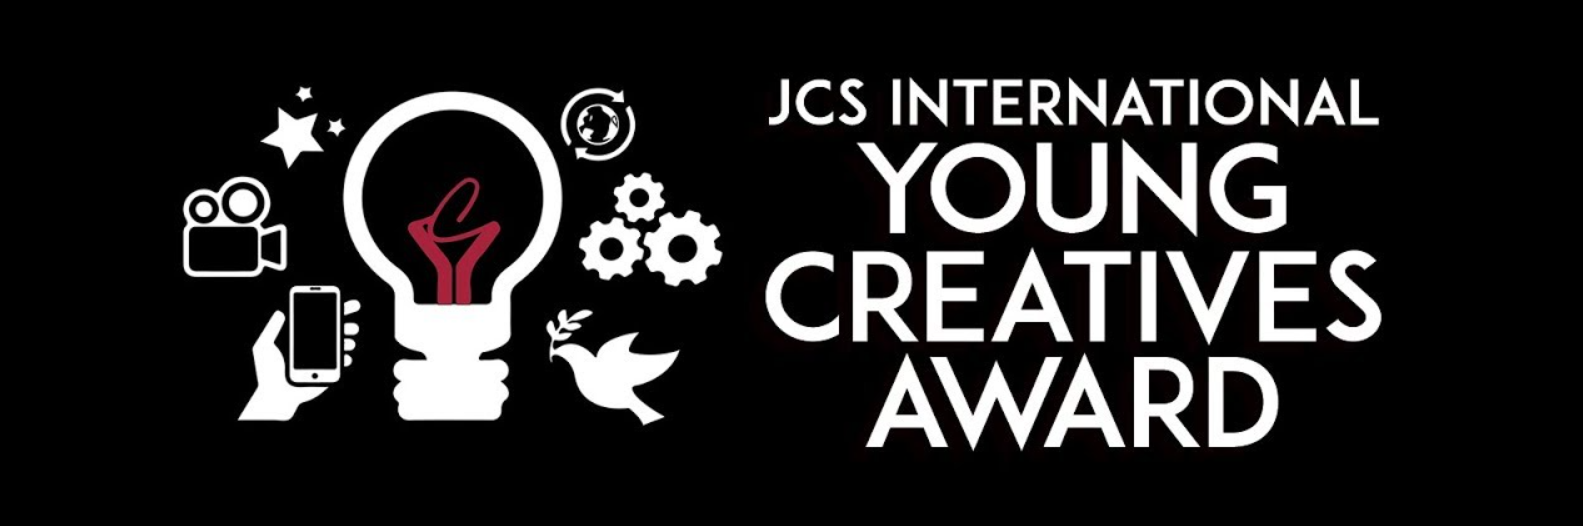 Call for submissions: International Young Creatives Award